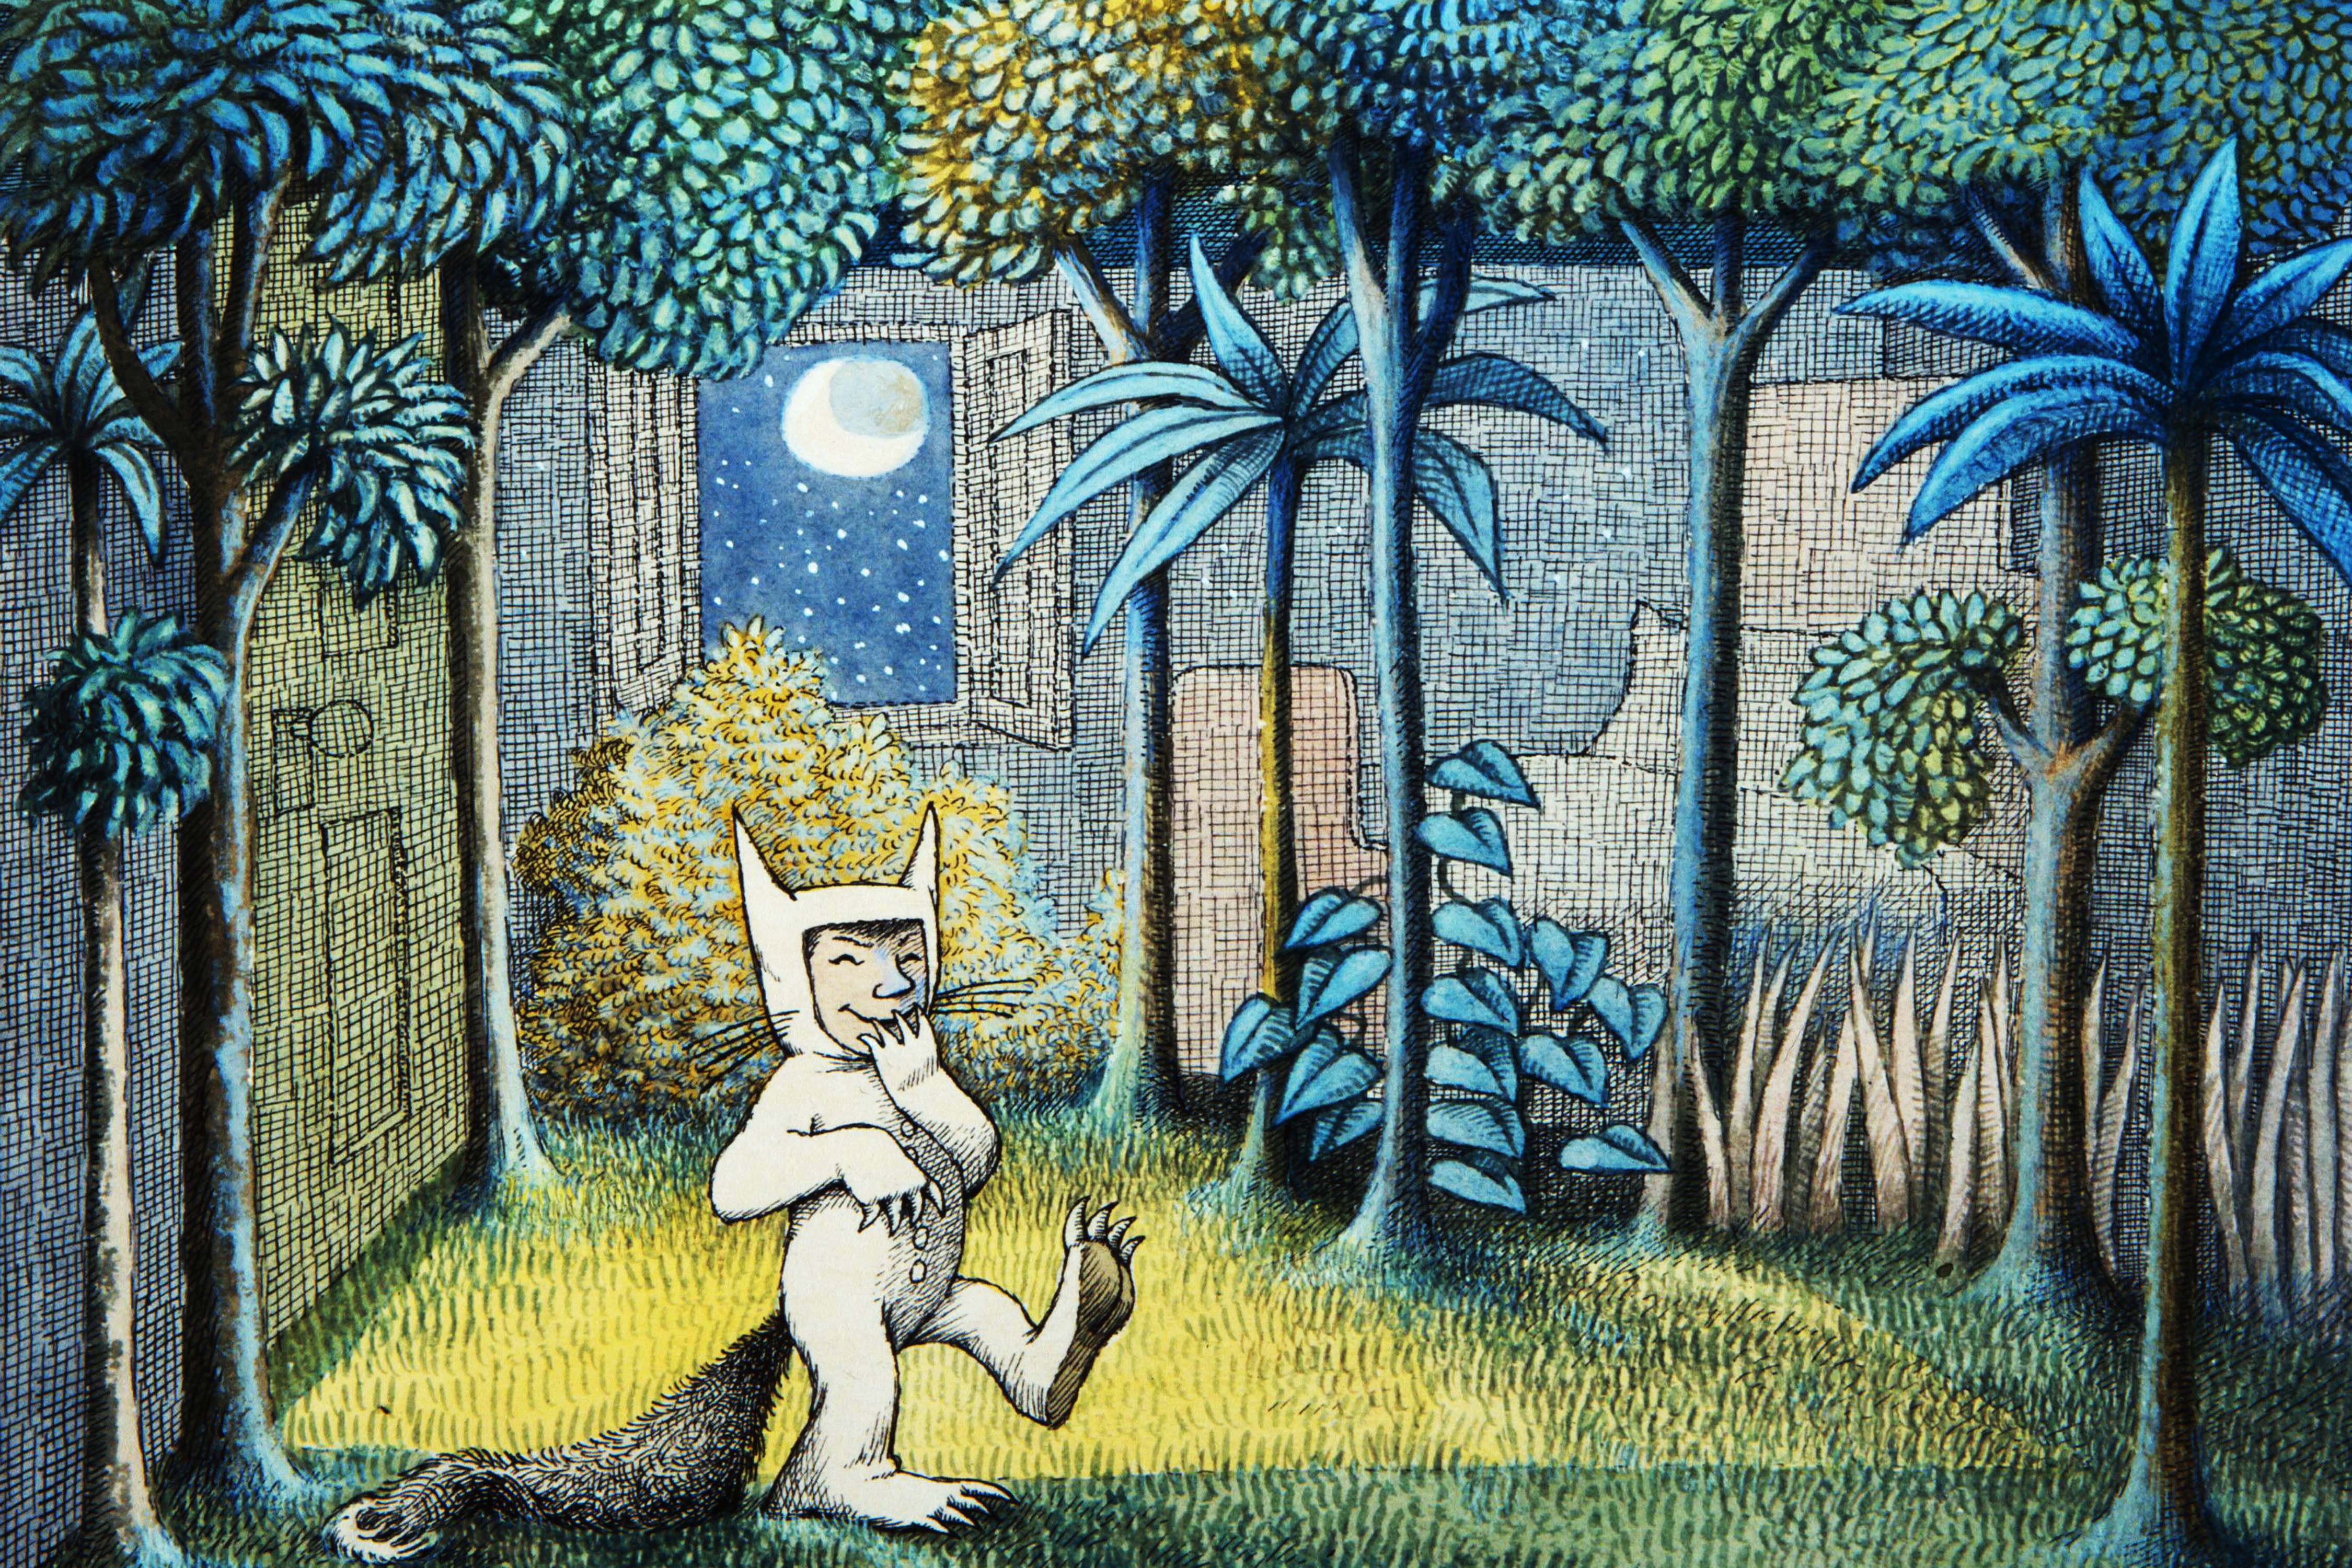 Where The Wild Things Are Backgrounds, Compatible - PC, Mobile, Gadgets| 4500x3000 px